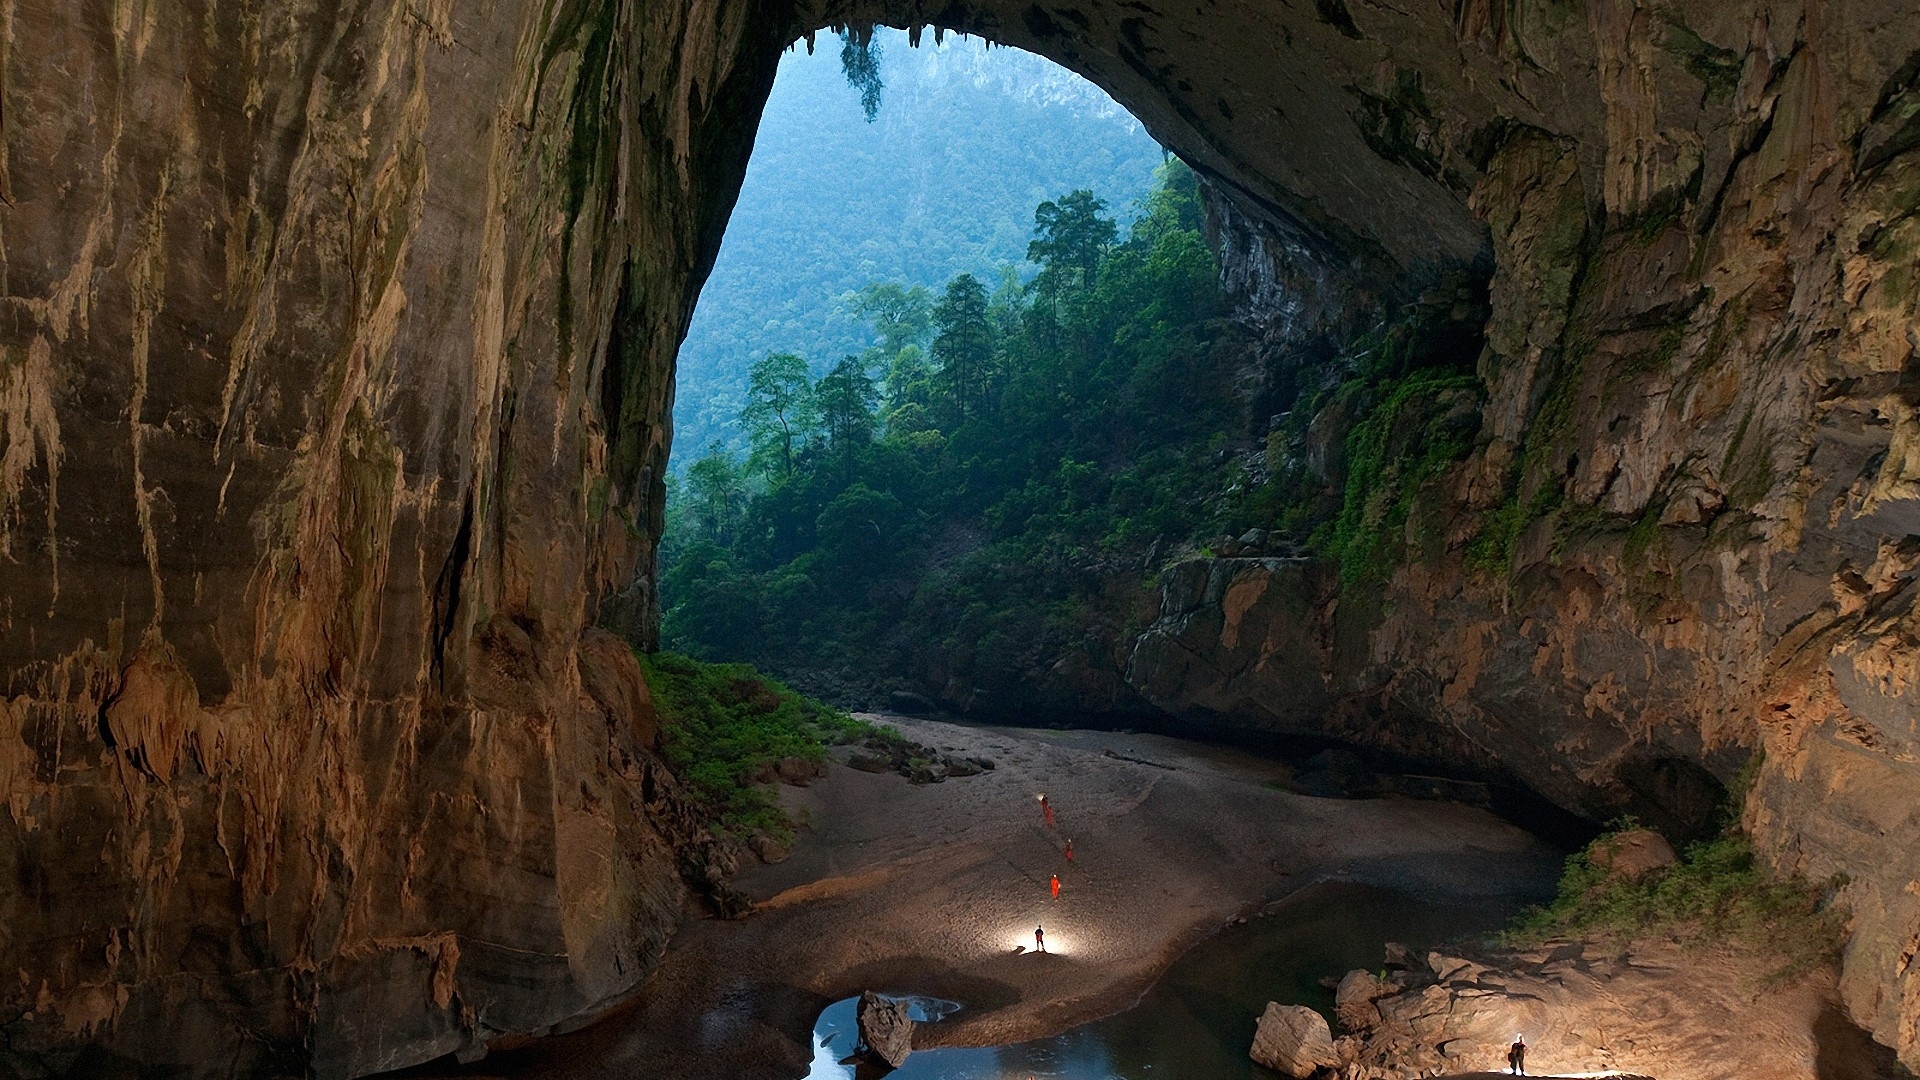 son, Doong, Cave, Nature, Landscapes, Caves, Trees, Forest, Jungle, Cliff, Stone, Walls, People Wallpaper